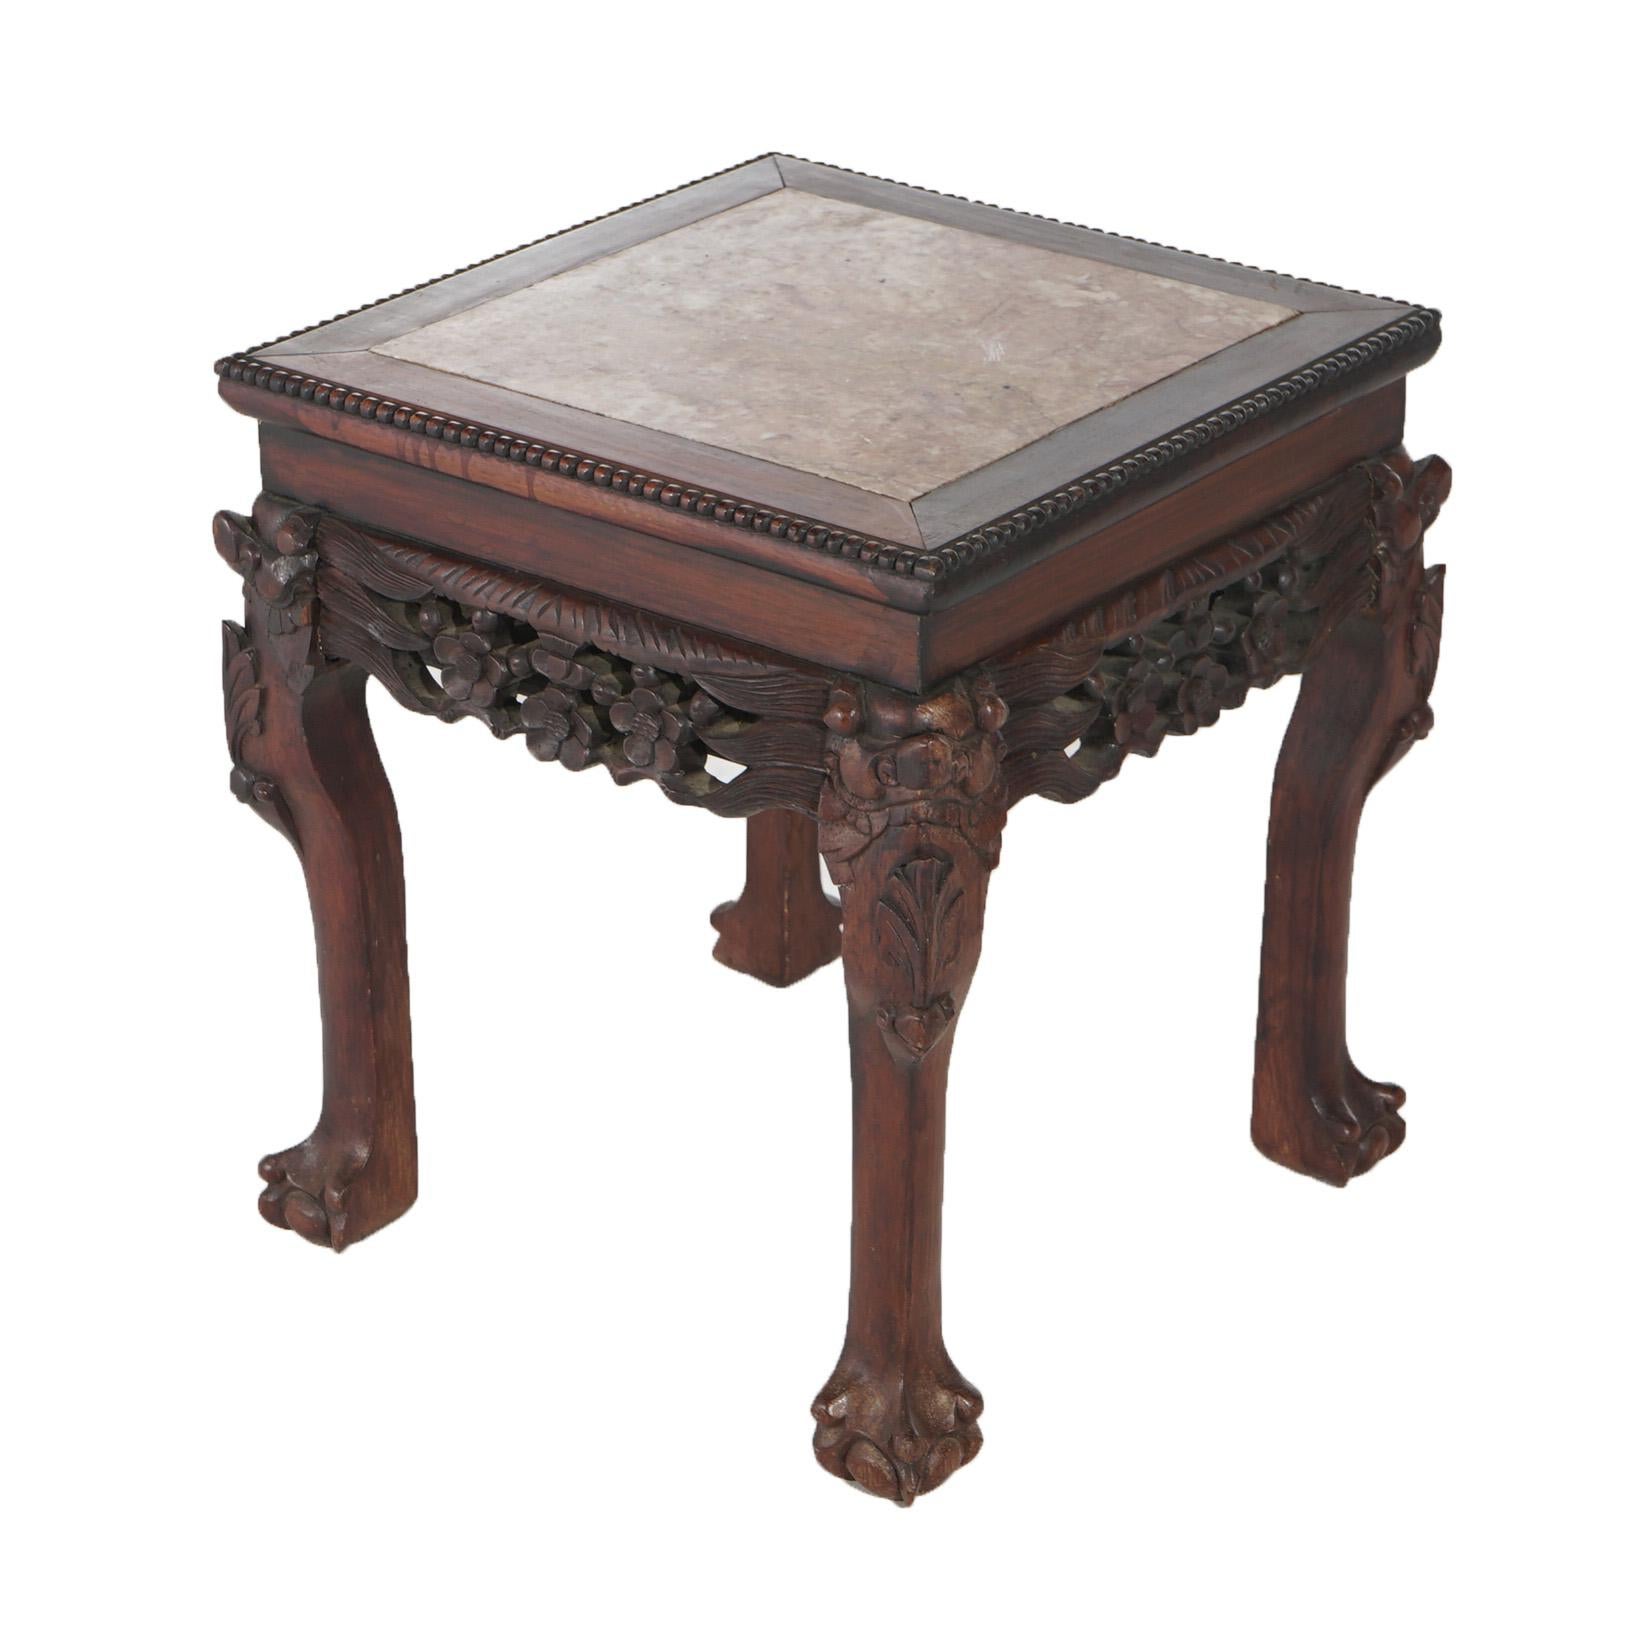 Antique Chinese Foliate Carved Rosewood & Rouge Marble Side Table with Claw & Ball Feet C1910

Measures- 18.25''H x 16.5''W x 16.5''D